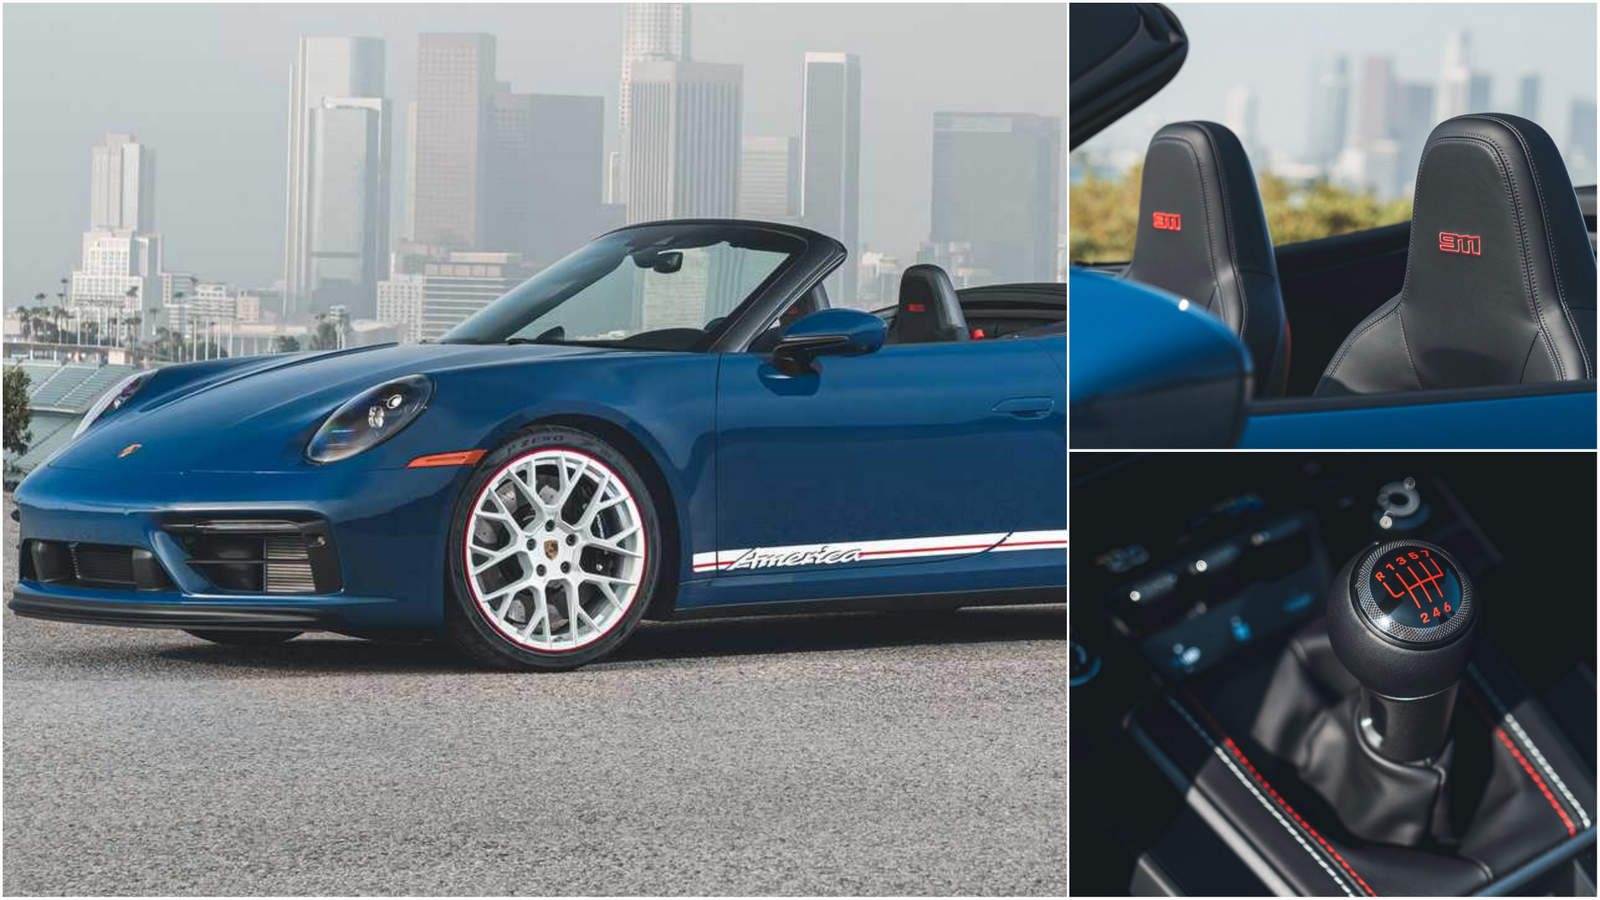 New Porsche 911 Carrera T revealed with seven-speed manual stick